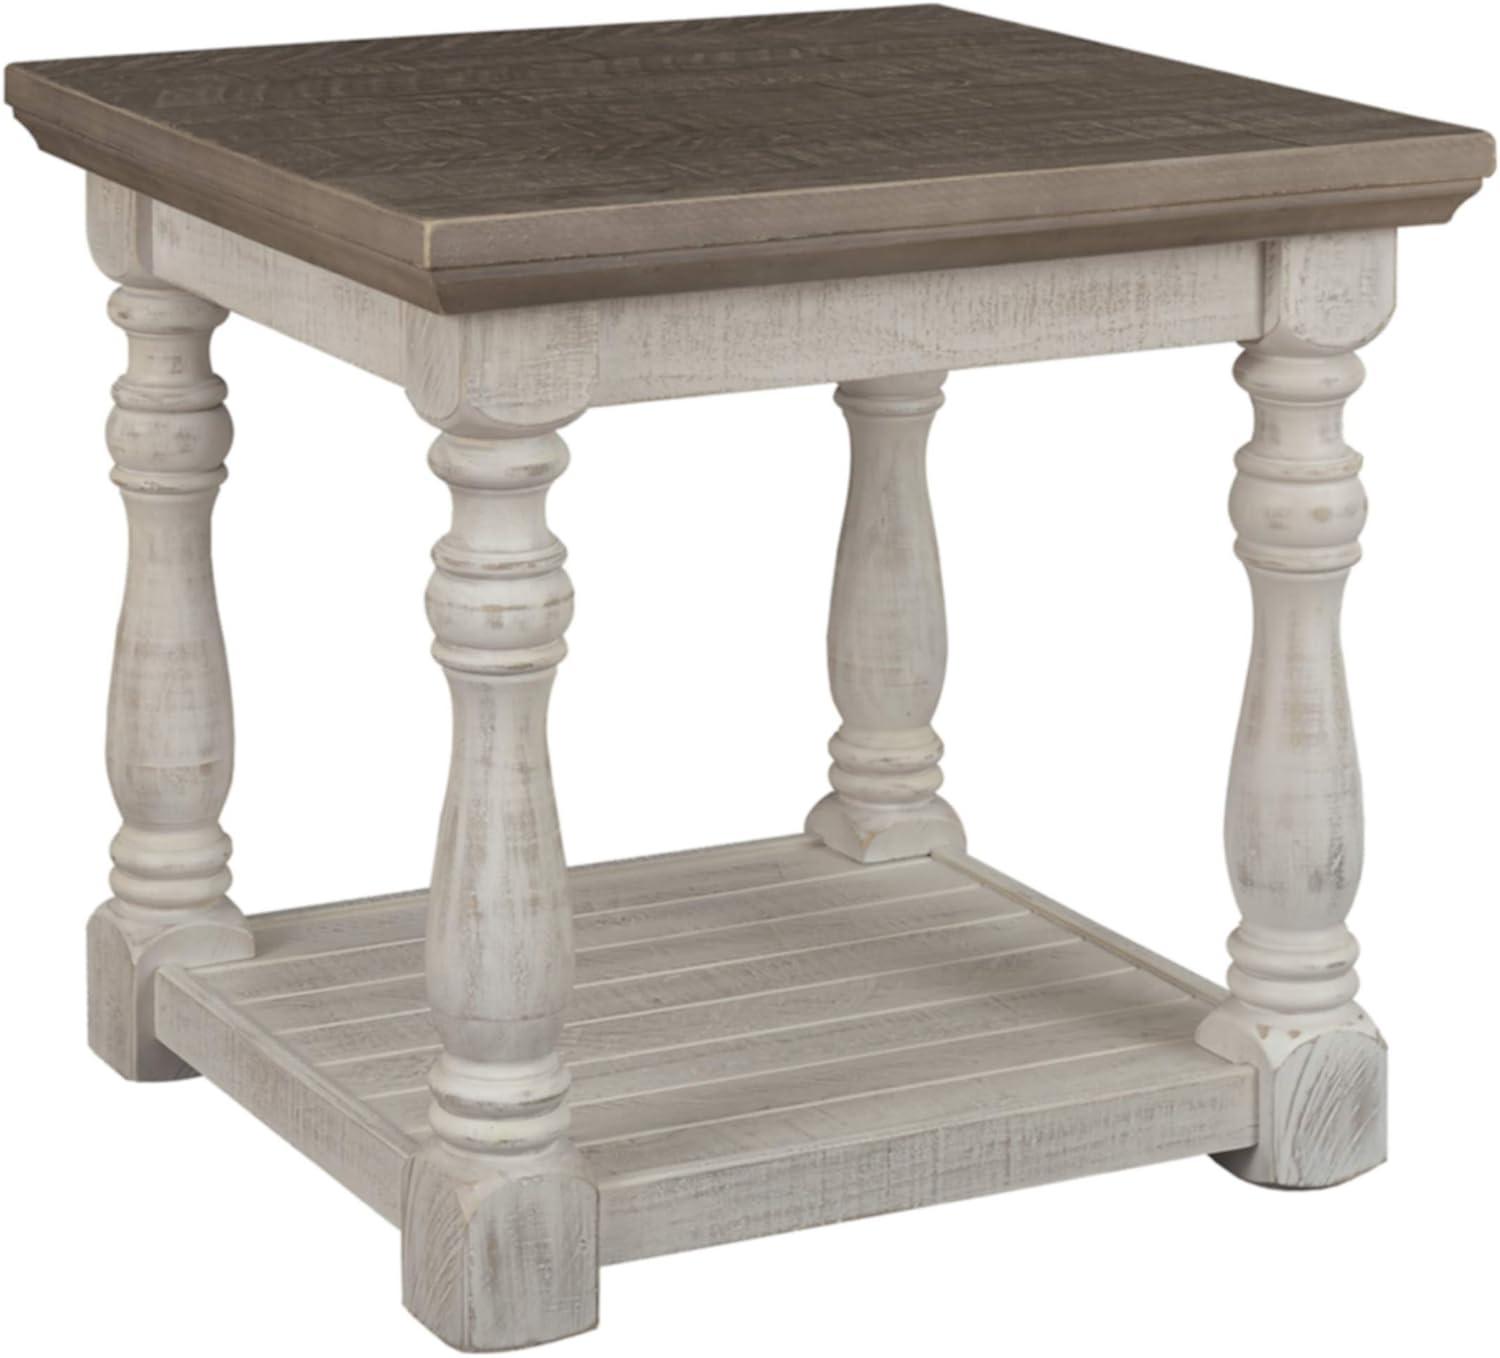 Modern Gray & White Rustic Wood Square End Table